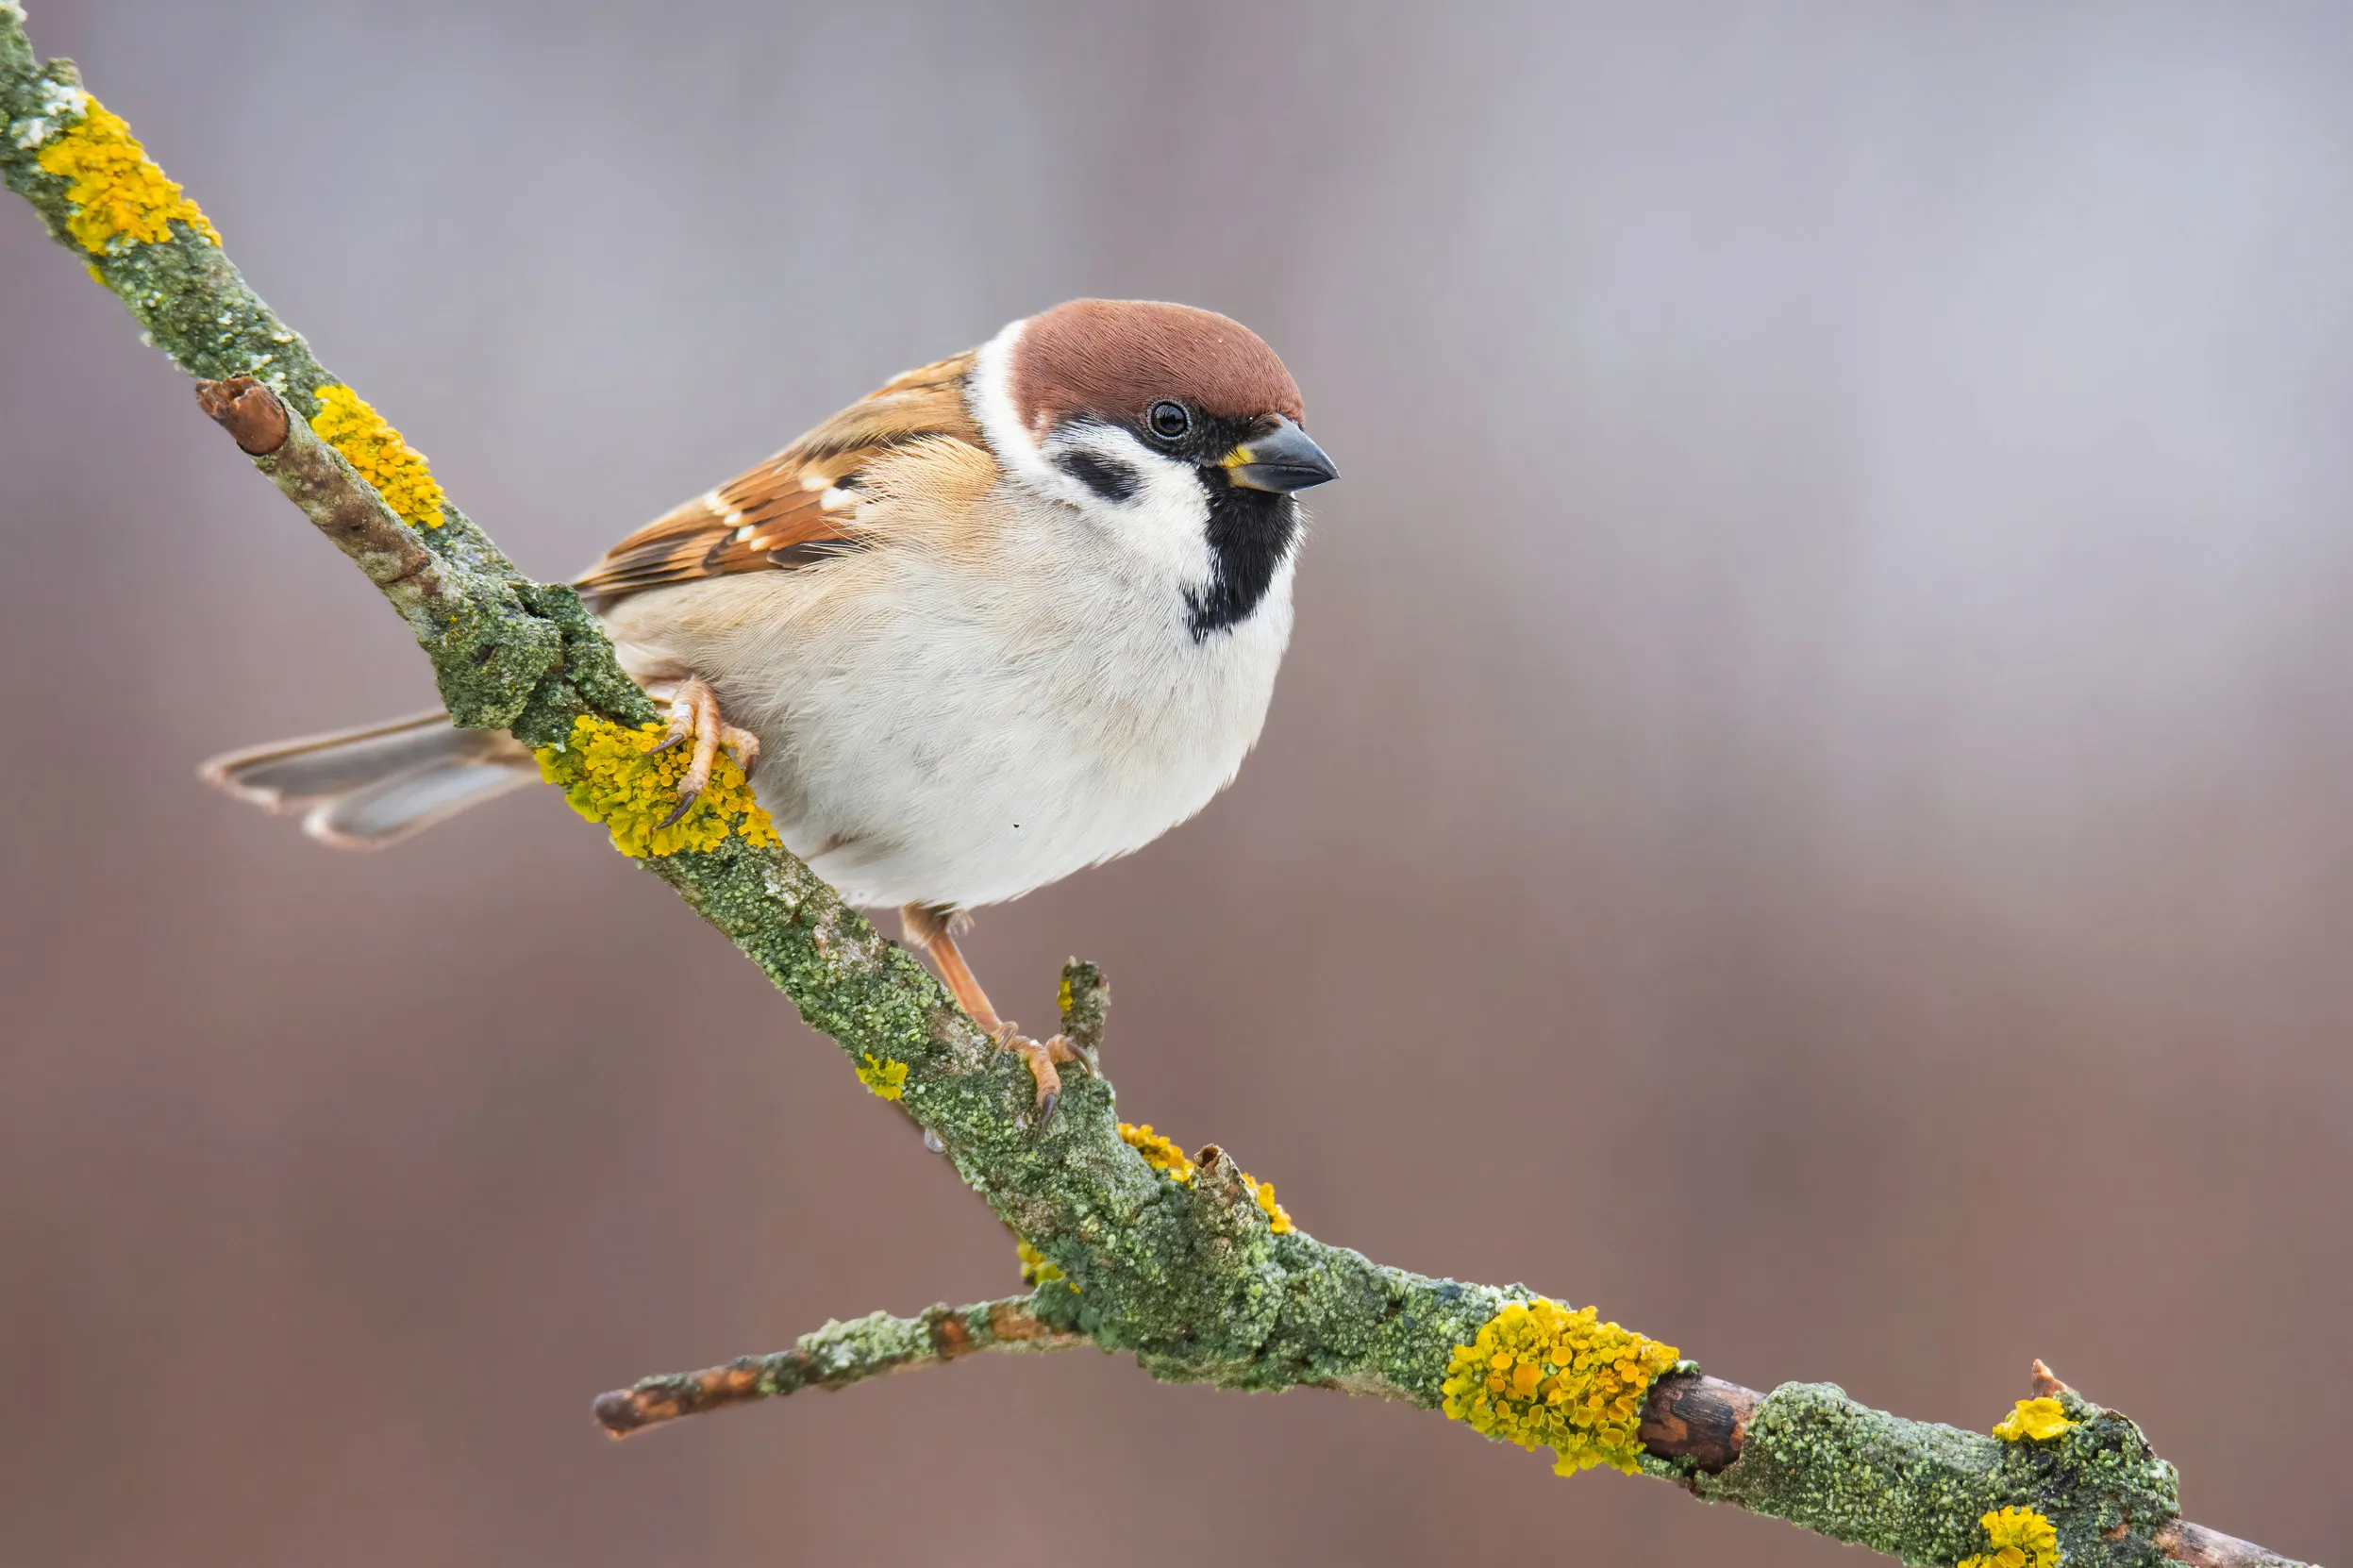 A Tree Sparrow perched on a lichen covered branch.